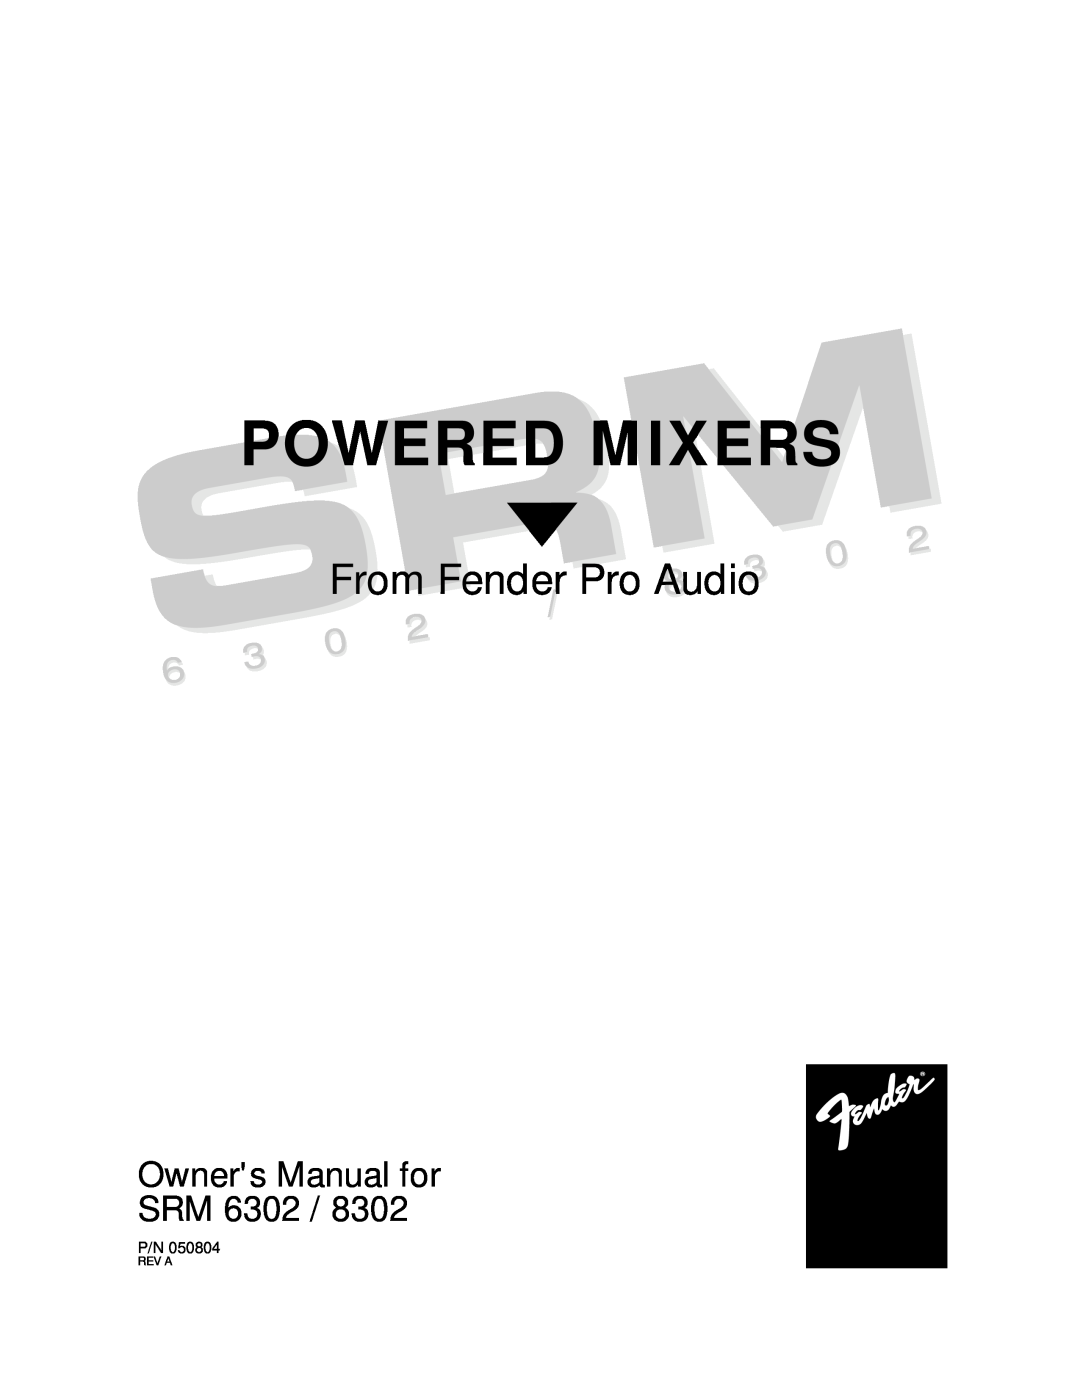 Fender SRM 6302, SRM 8302 manual Powered Mixers, From Fender Pro Audio 